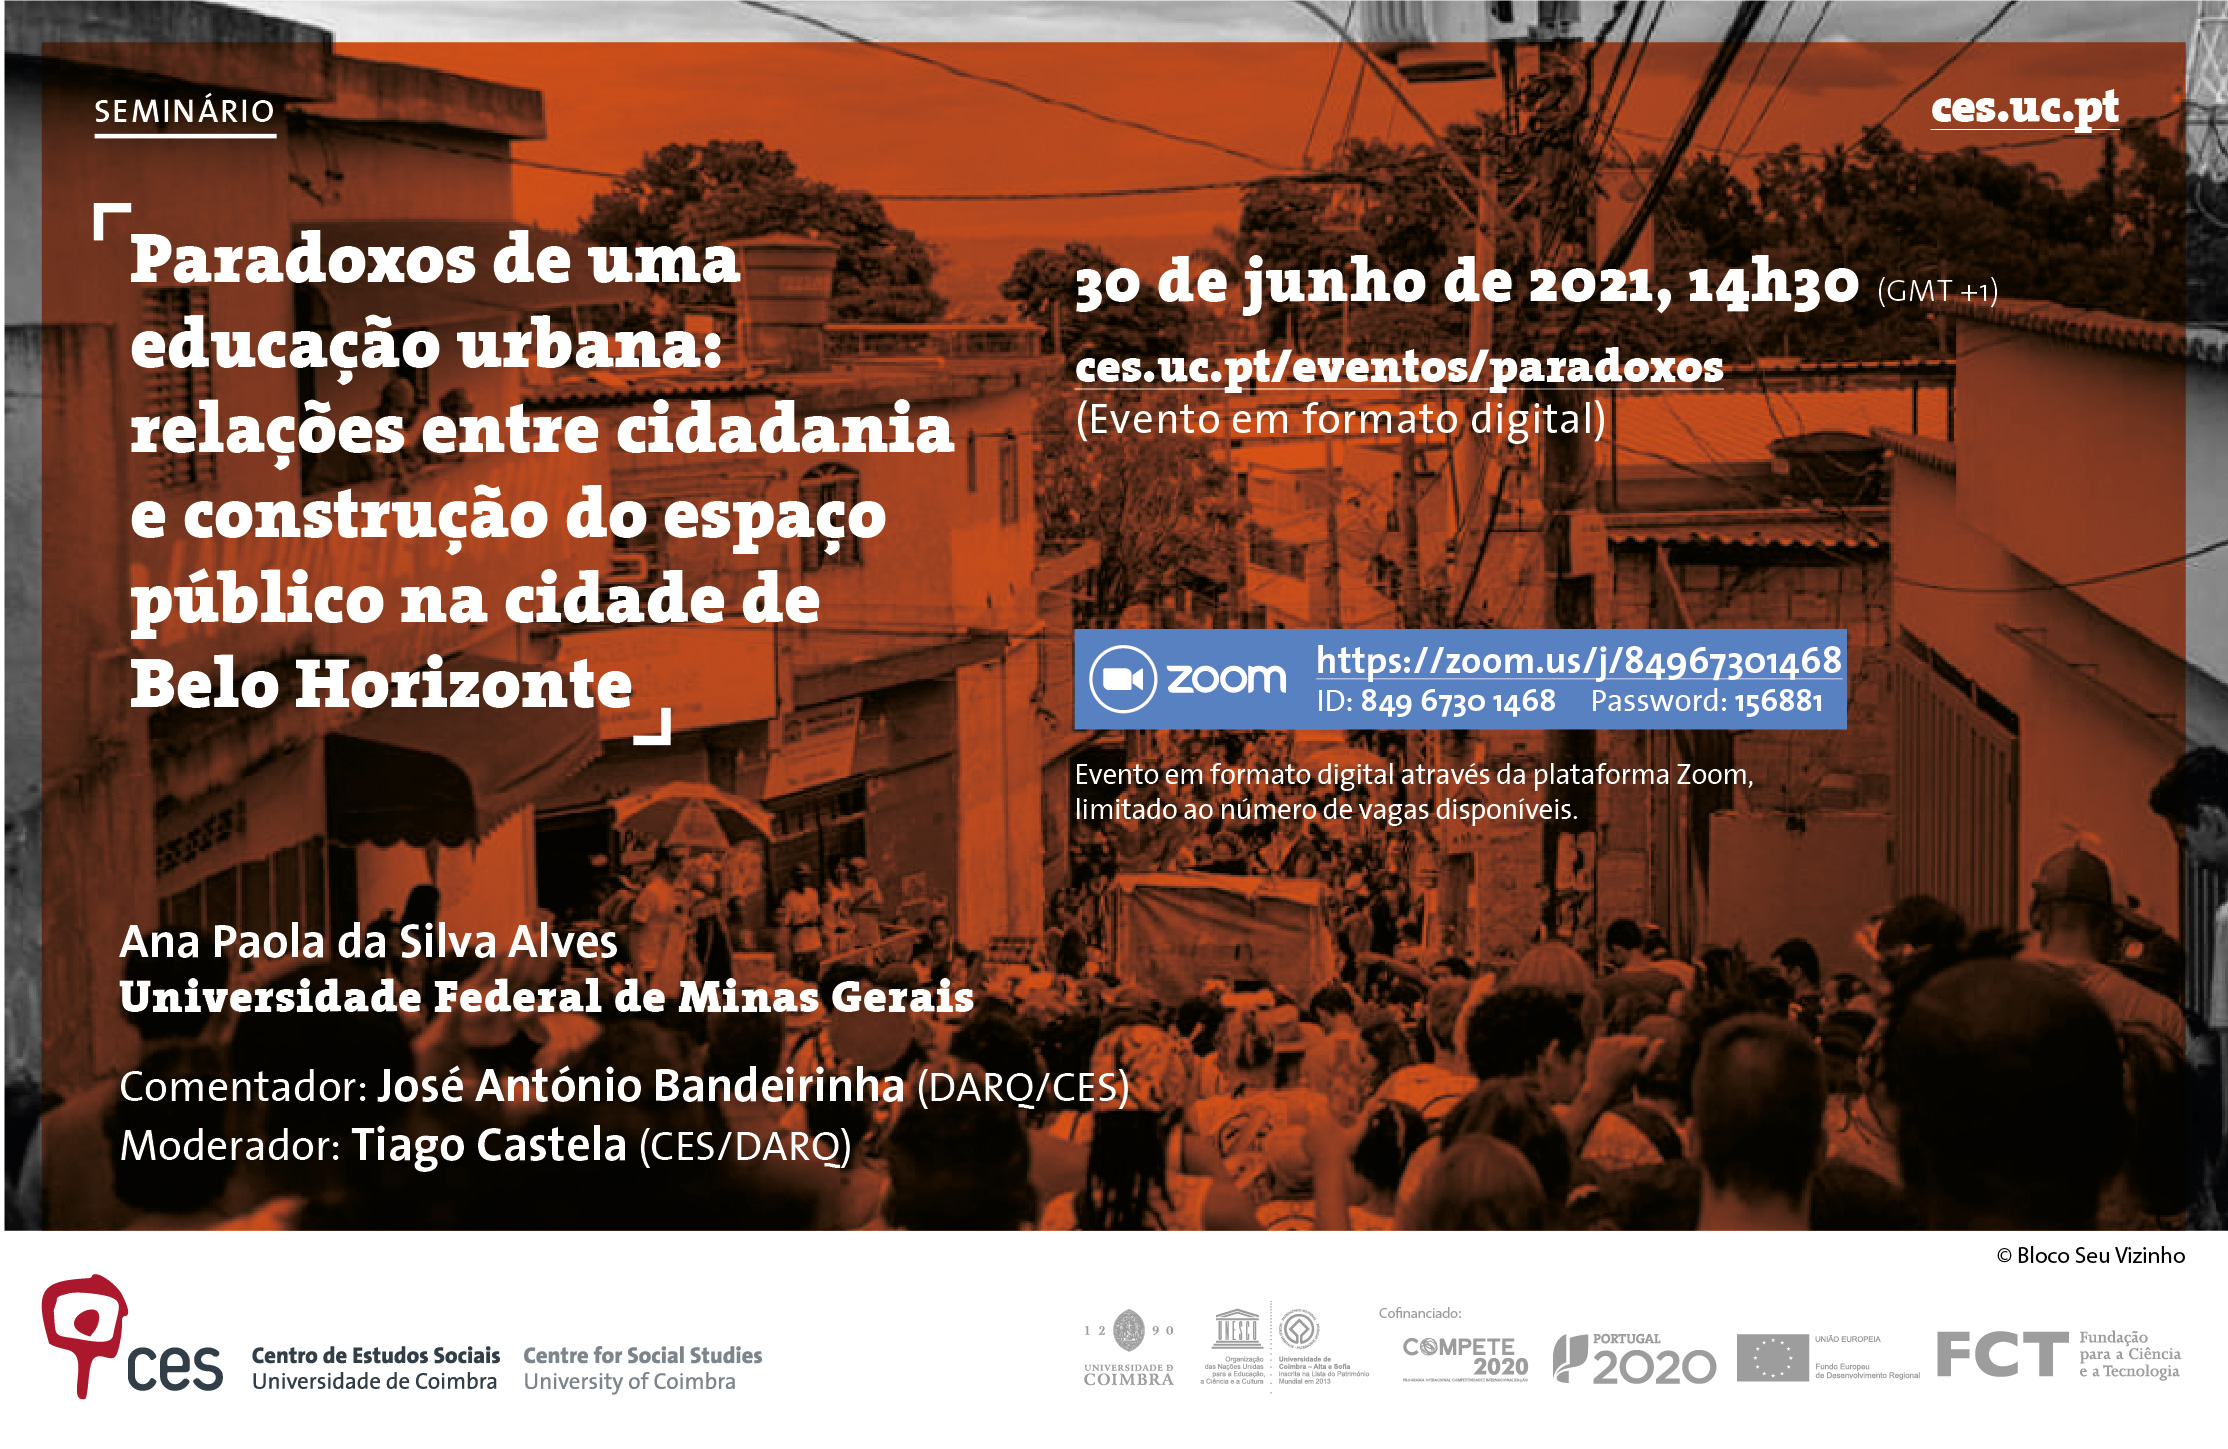 Paradoxes of urban education: relations between citizenship and the construction of public space in the city of Belo Horizonte<span id="edit_34300"><script>$(function() { $('#edit_34300').load( "/myces/user/editobj.php?tipo=evento&id=34300" ); });</script></span>